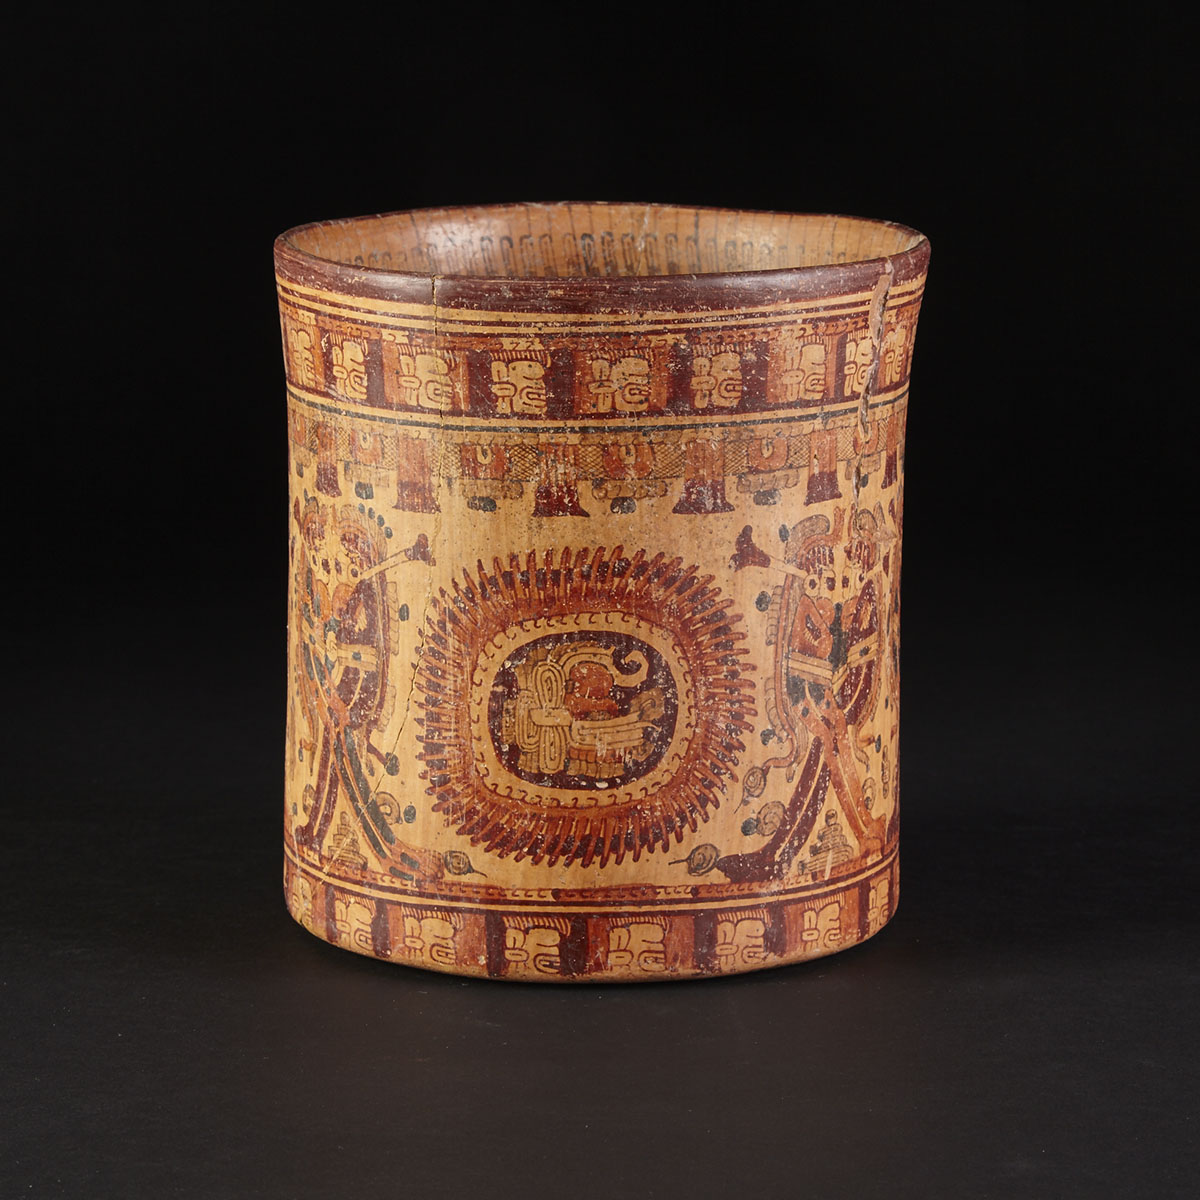 Mayan Polychromed Cylinder Pot, Late Classic Period, 600-800 A.D.